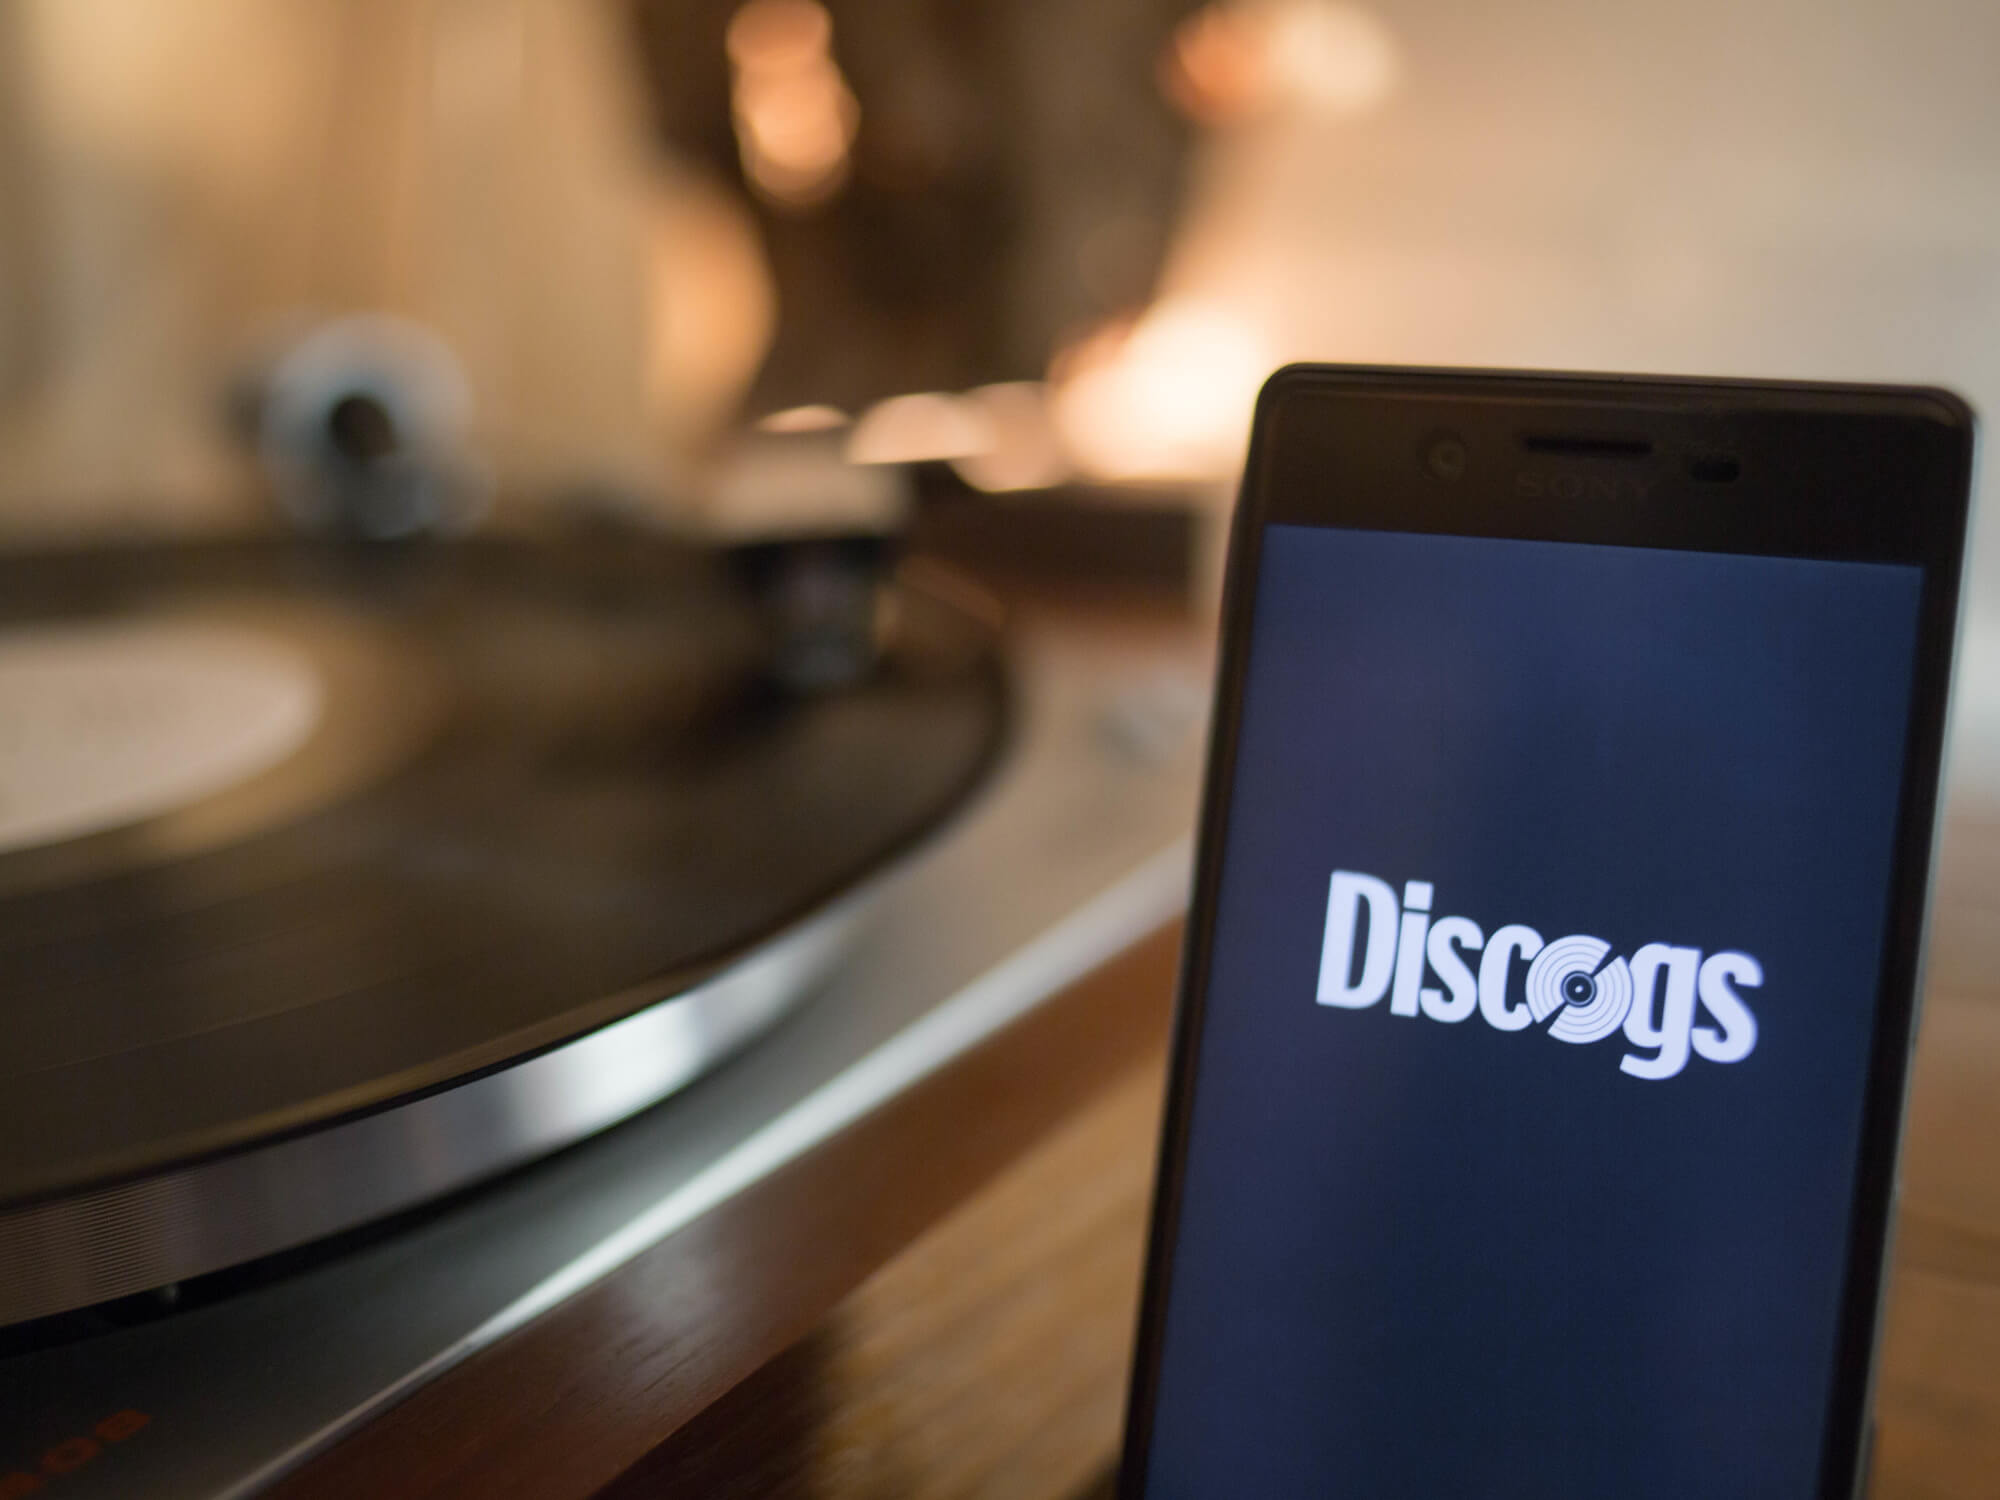 Discogs logo on smartphone next to record player